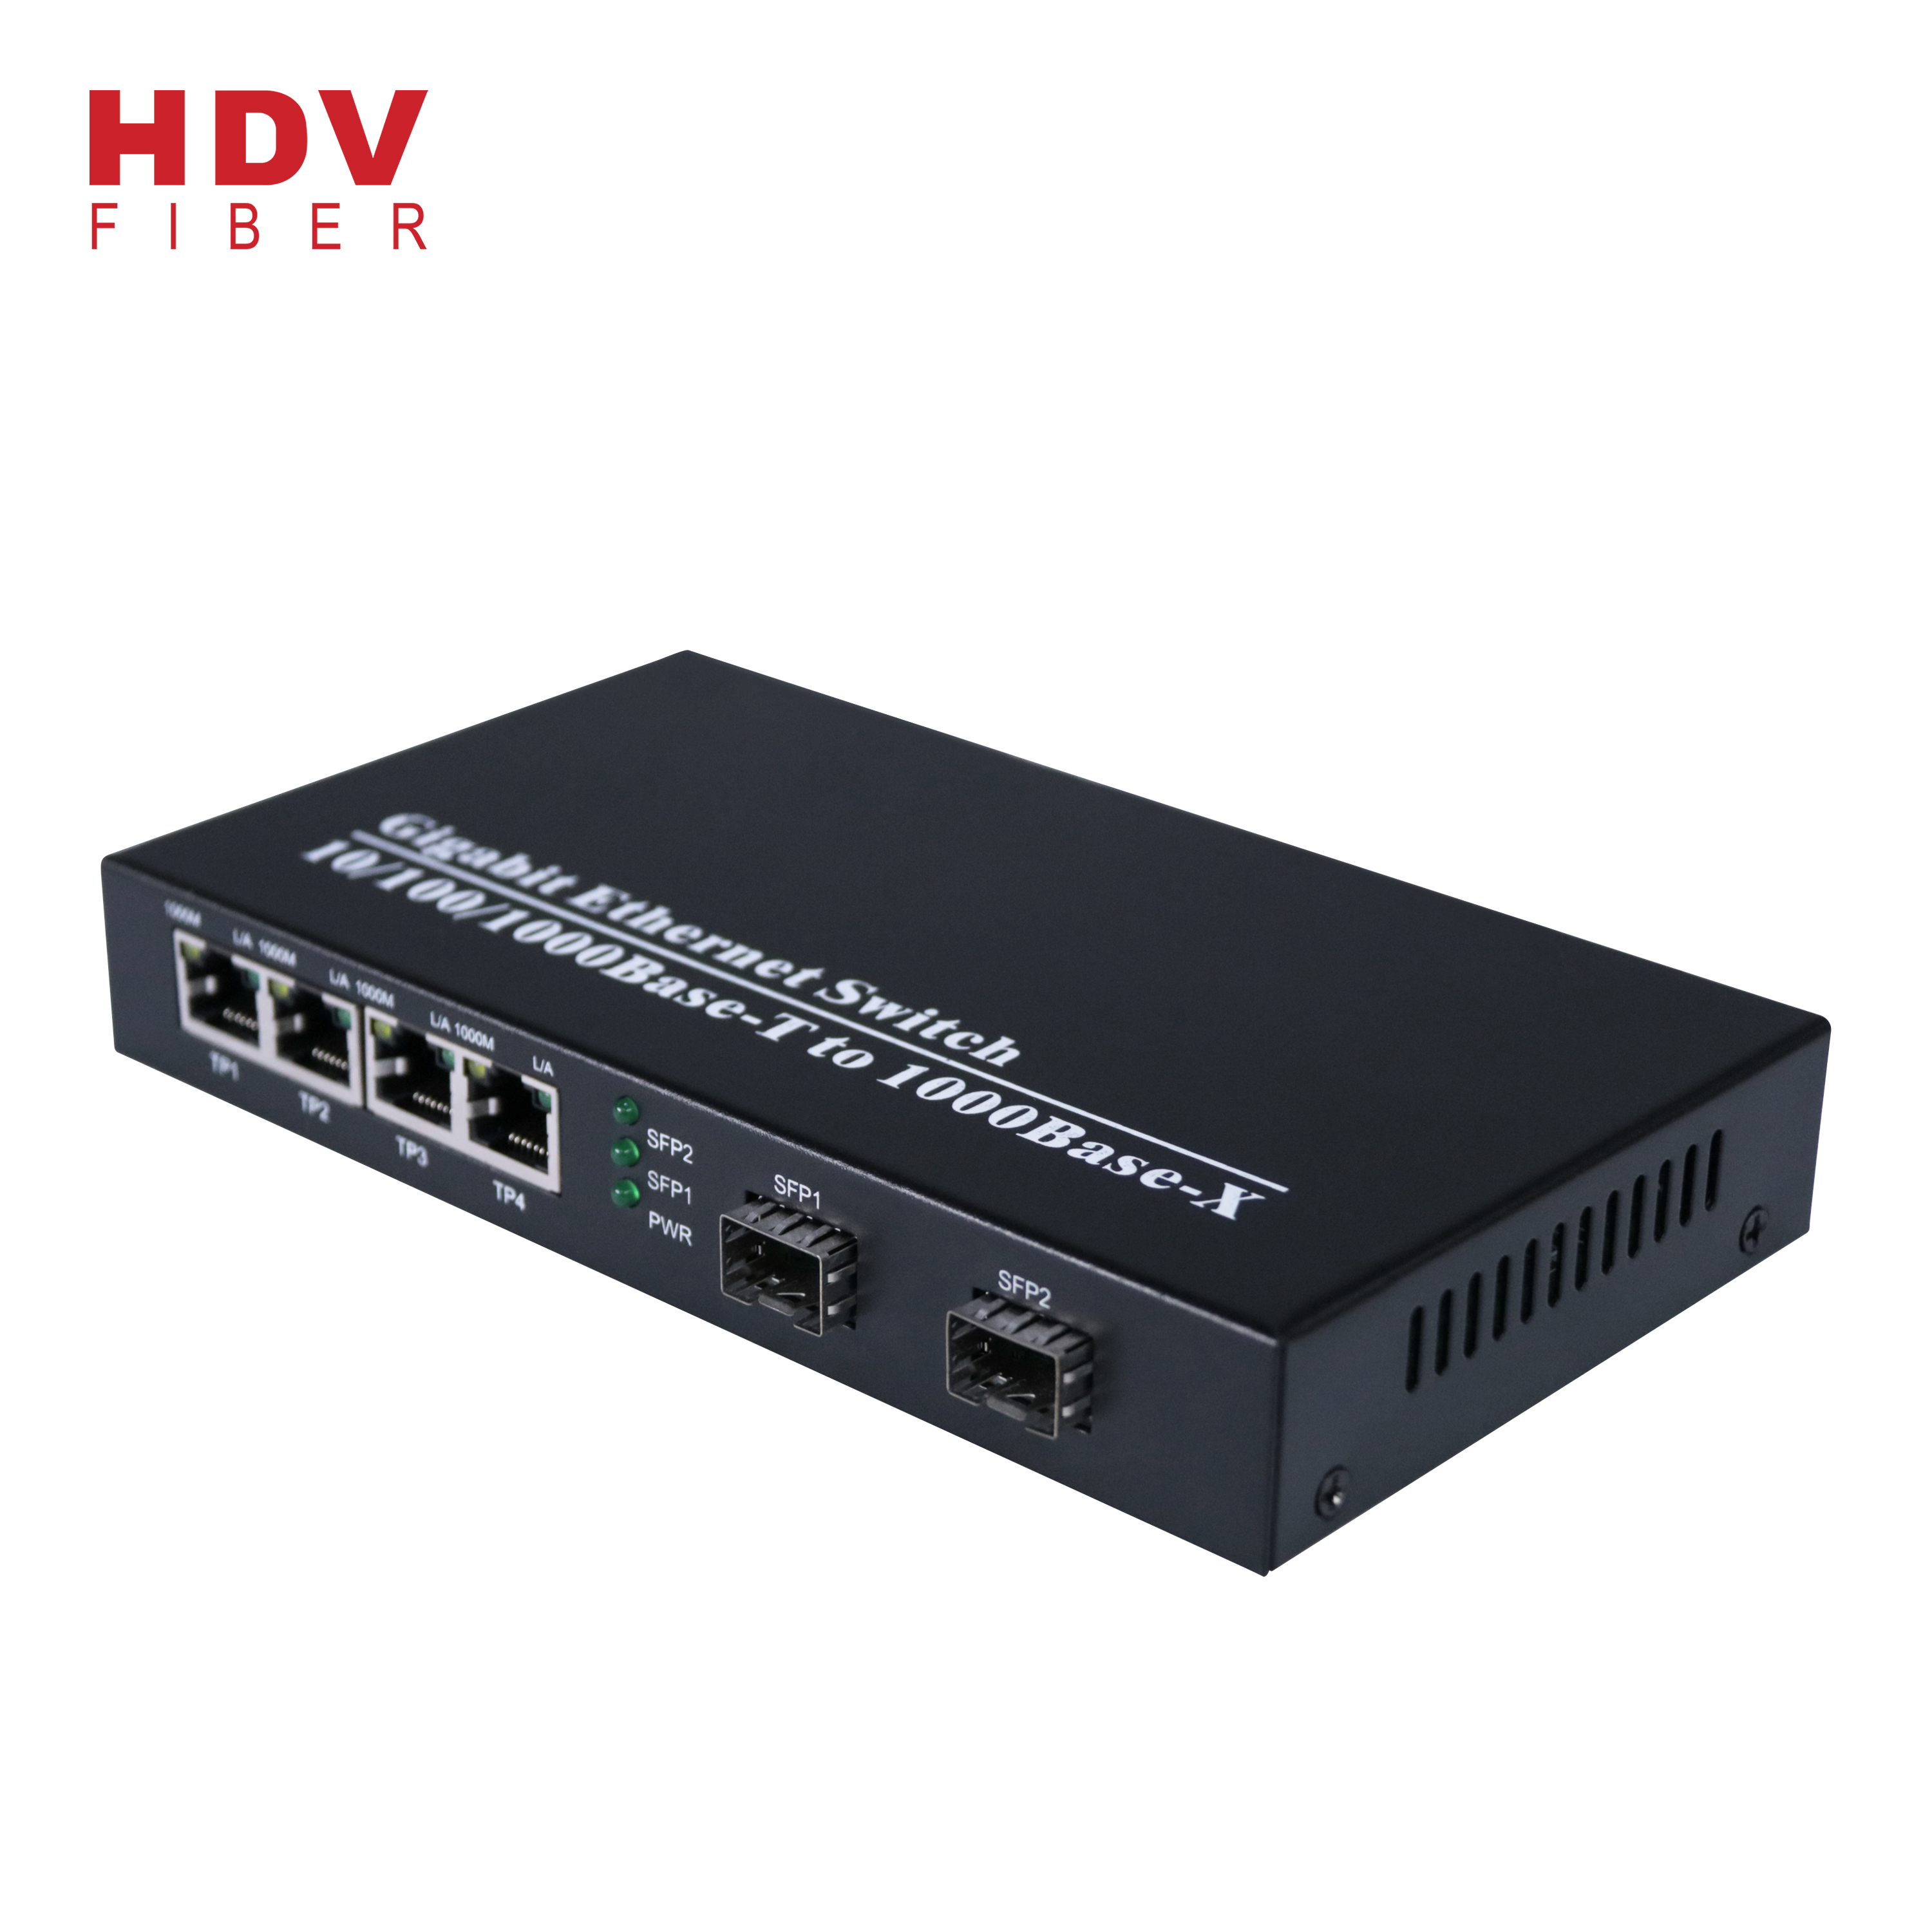 China Cheap price Gigabit Managed Switch - 4 Port Gigabit Ethernet Switch and 2 SFP Ports 1000M fiber optic transceiver switch – HDV